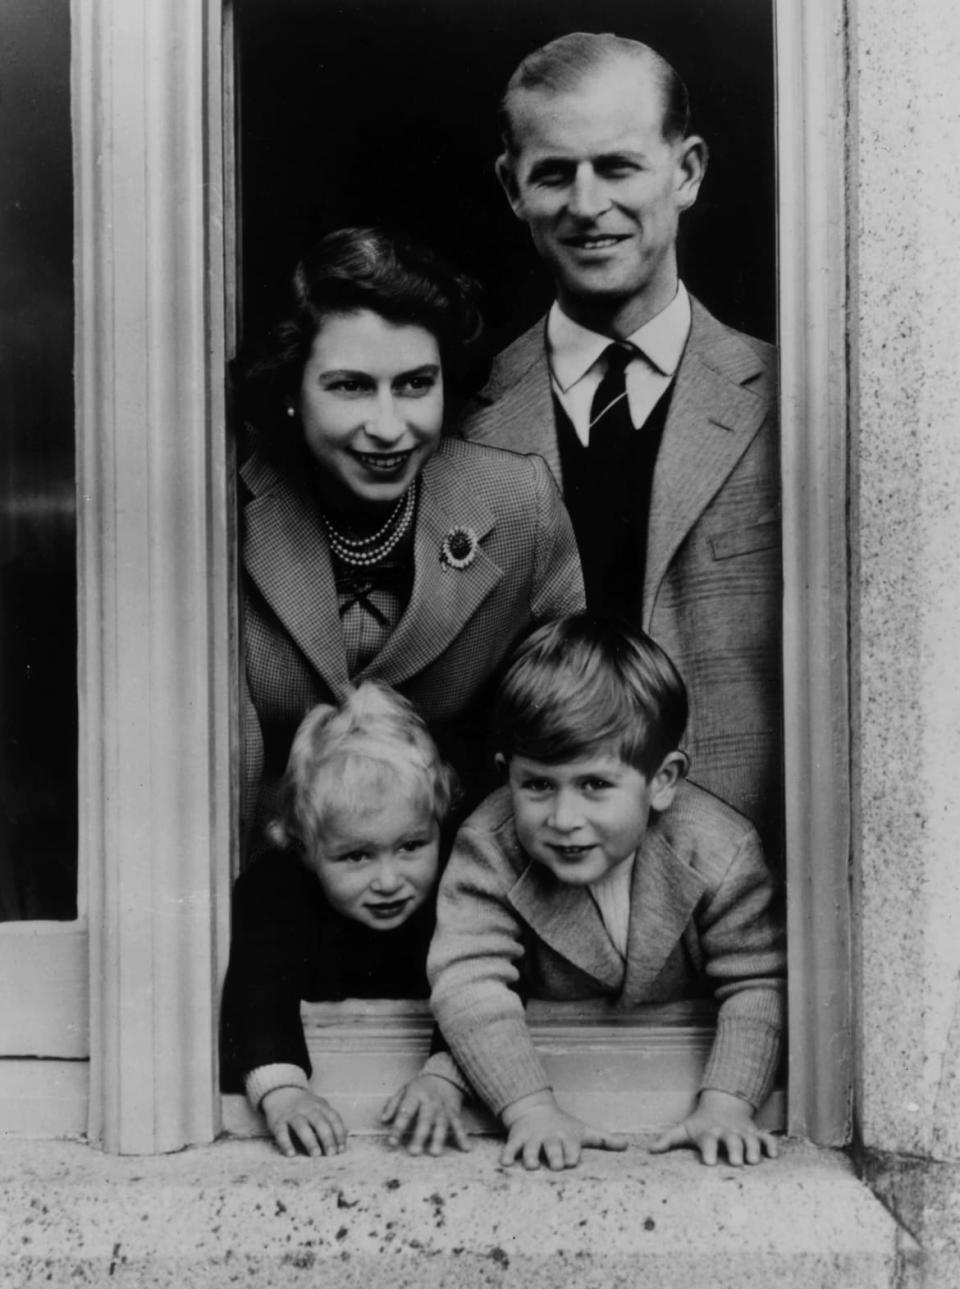 <div class="inline-image__caption"><p>Queen Elizabeth with Prince Philip and their children, Charles and Anne, at Balmoral Castle in Scotland on Sept. 28, 1952.</p></div> <div class="inline-image__credit">Lisa Sheridan/Getty</div>